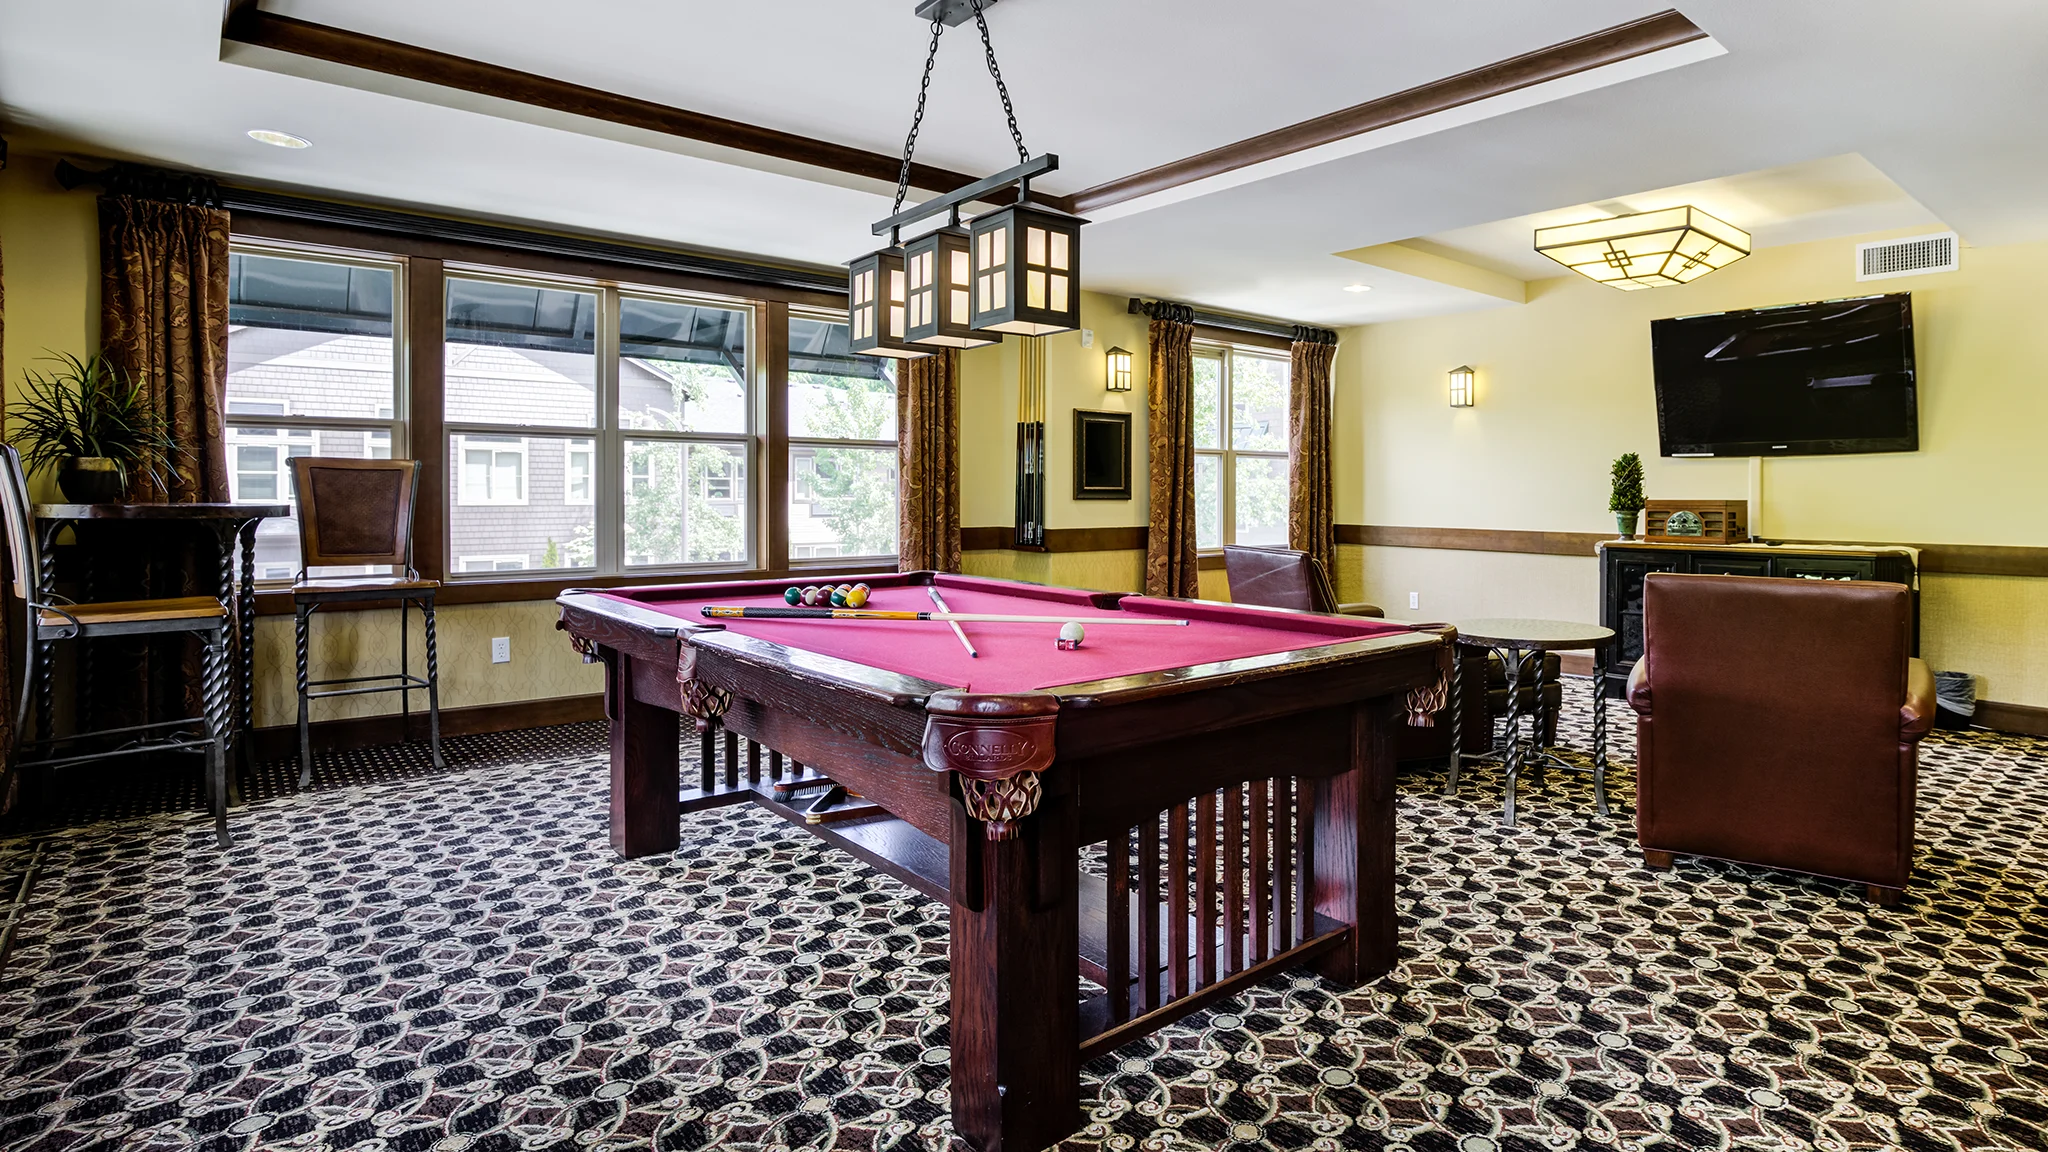 Pool table, TV, and various seating options